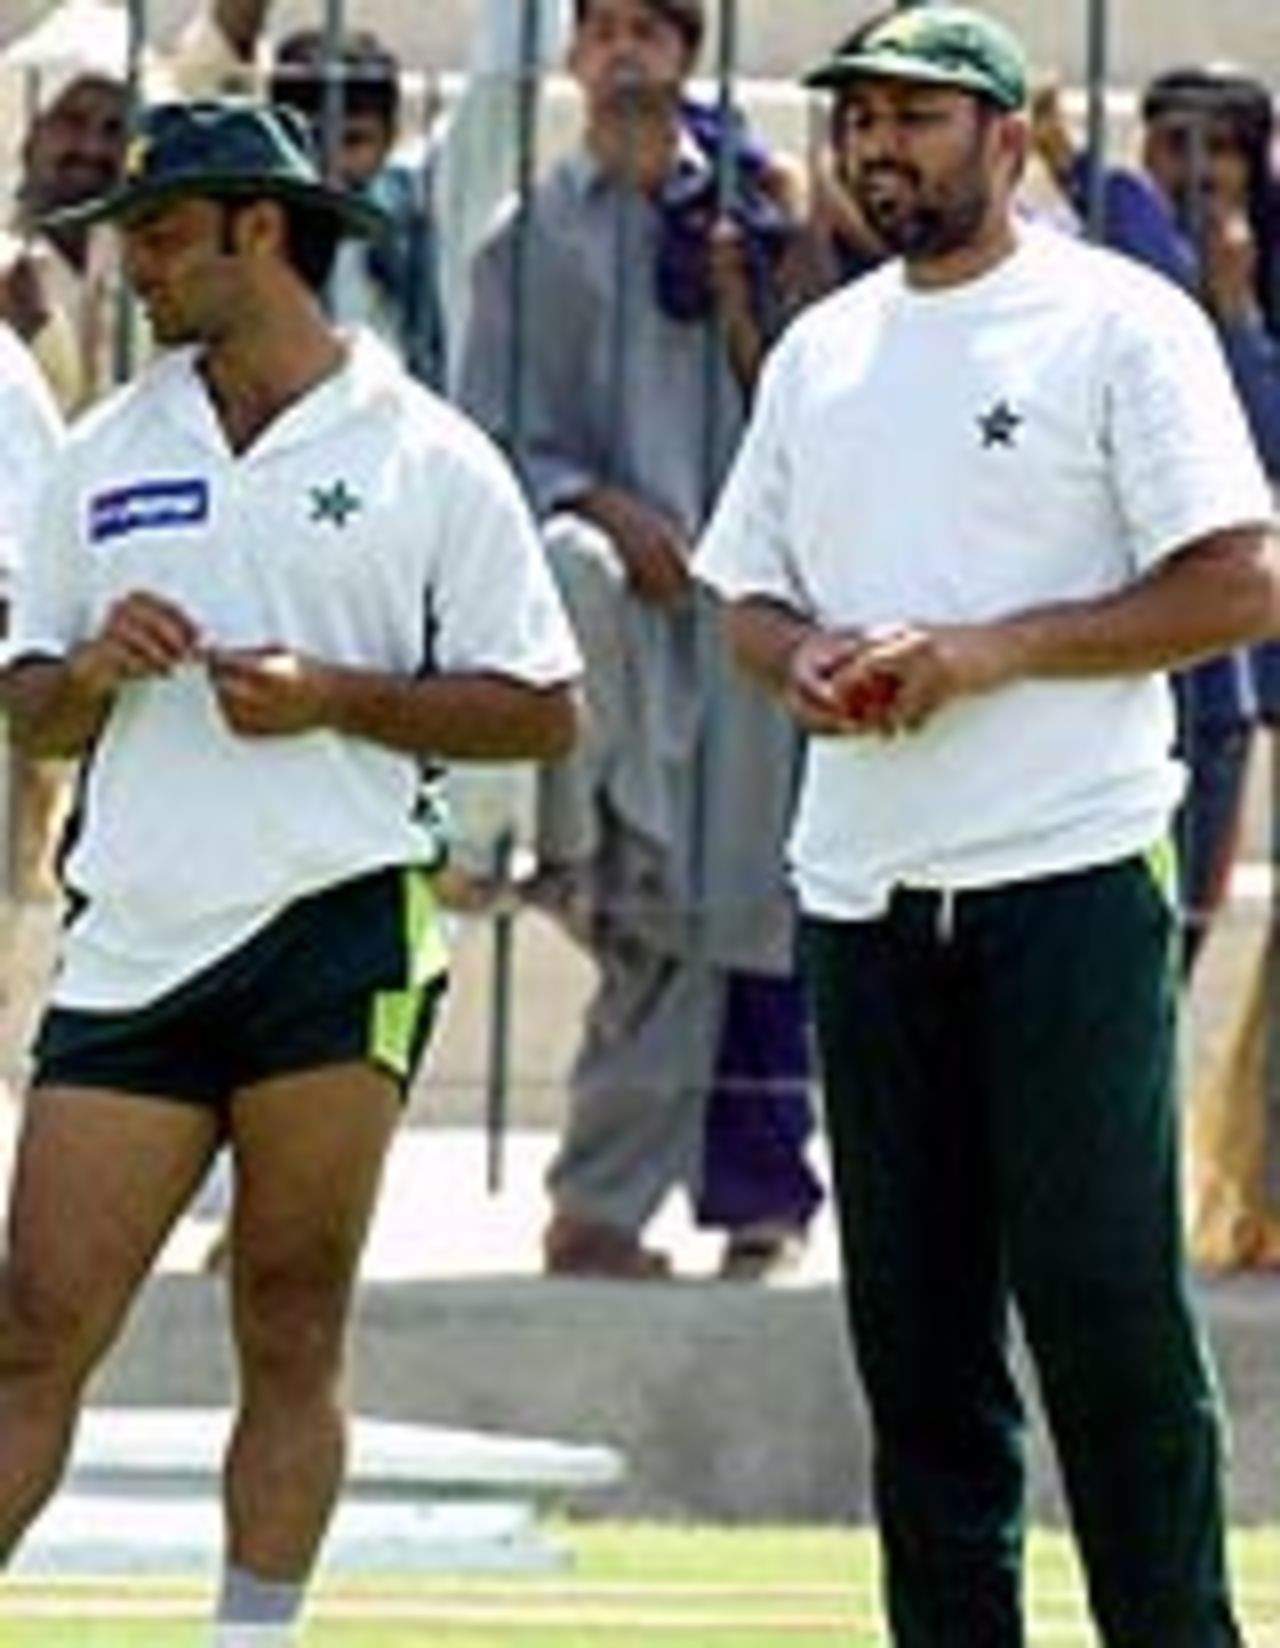 Shoaib Akhtar and Inzamam-ul-Haq in the nets, two days before the first Test between India and Pakistan at Multan, March 27, 2004